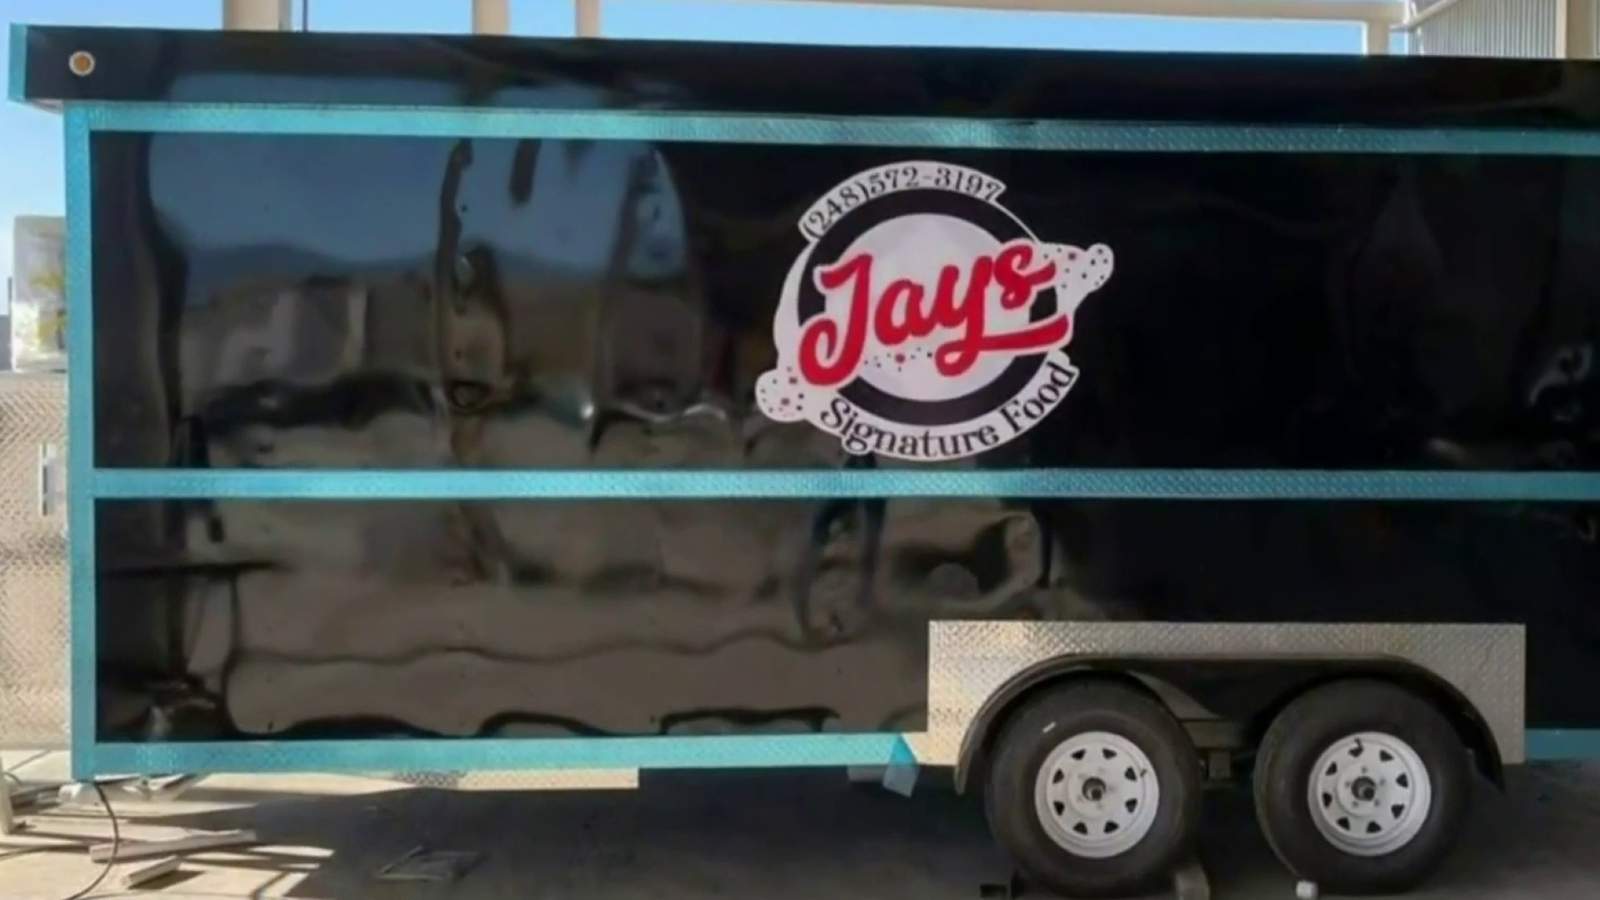 Food truck stolen from Detroit father, owner of Jay’s Signature Food: ‘I’m just lost’